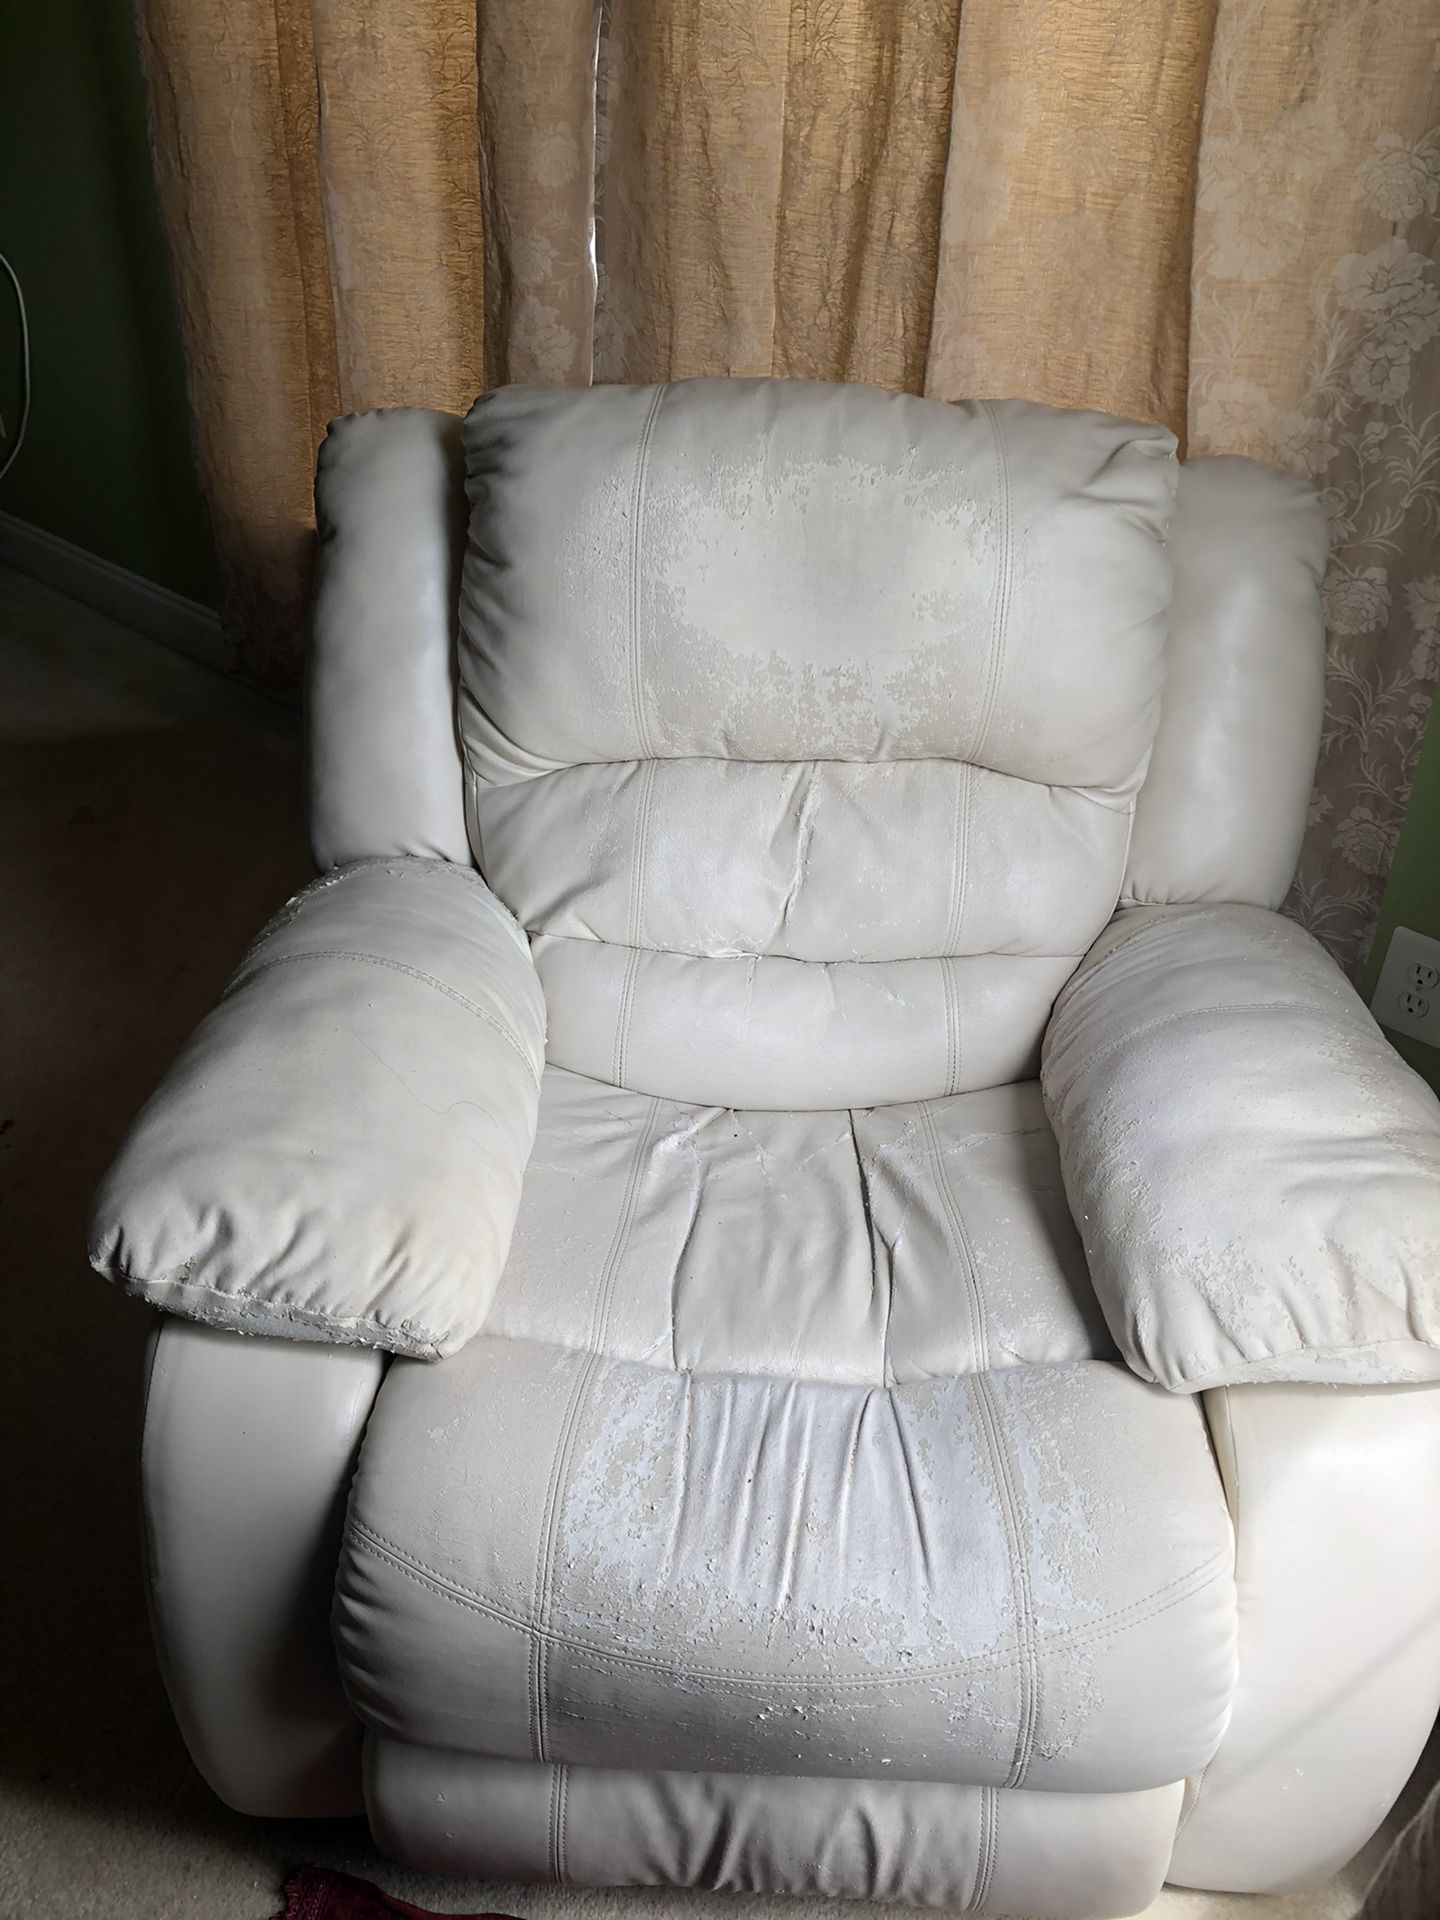 Reclining & Rocking chair - FREE - Last 2 days for pickup! Being hauled away